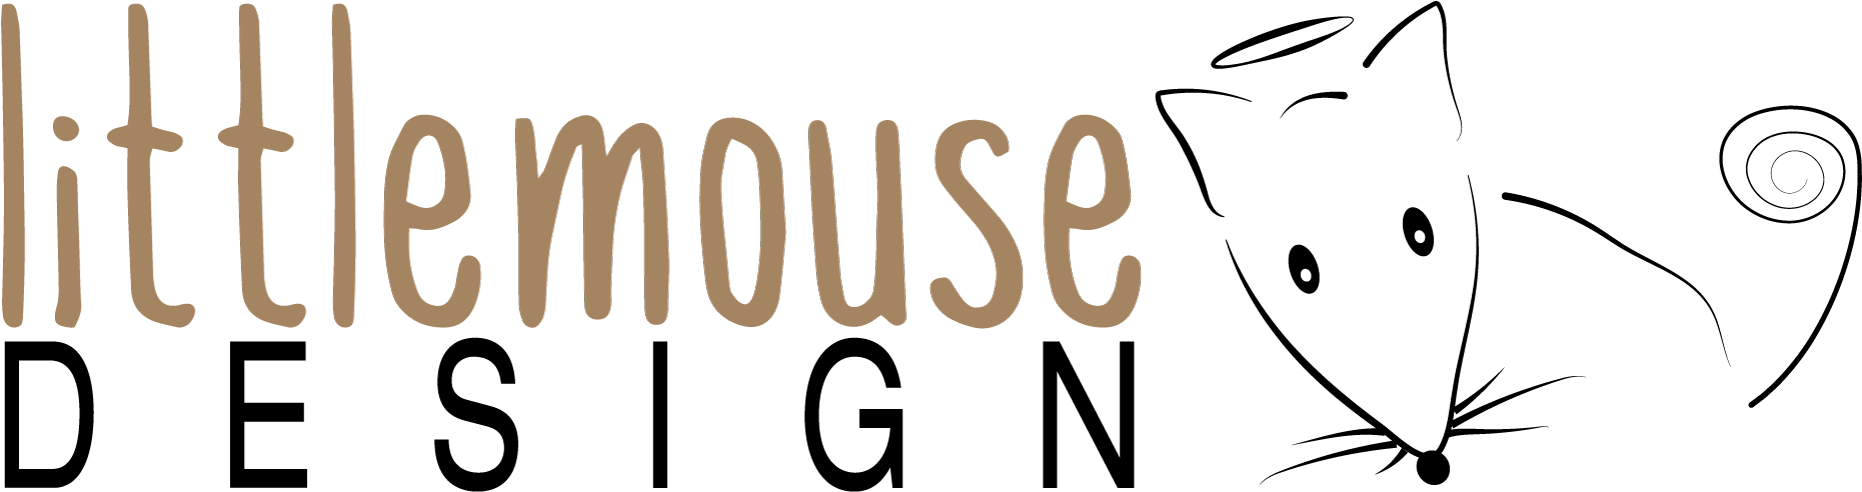 Little Mouse Logo Brown Side By Side Header 1920px - Calligraphy (1920x570)